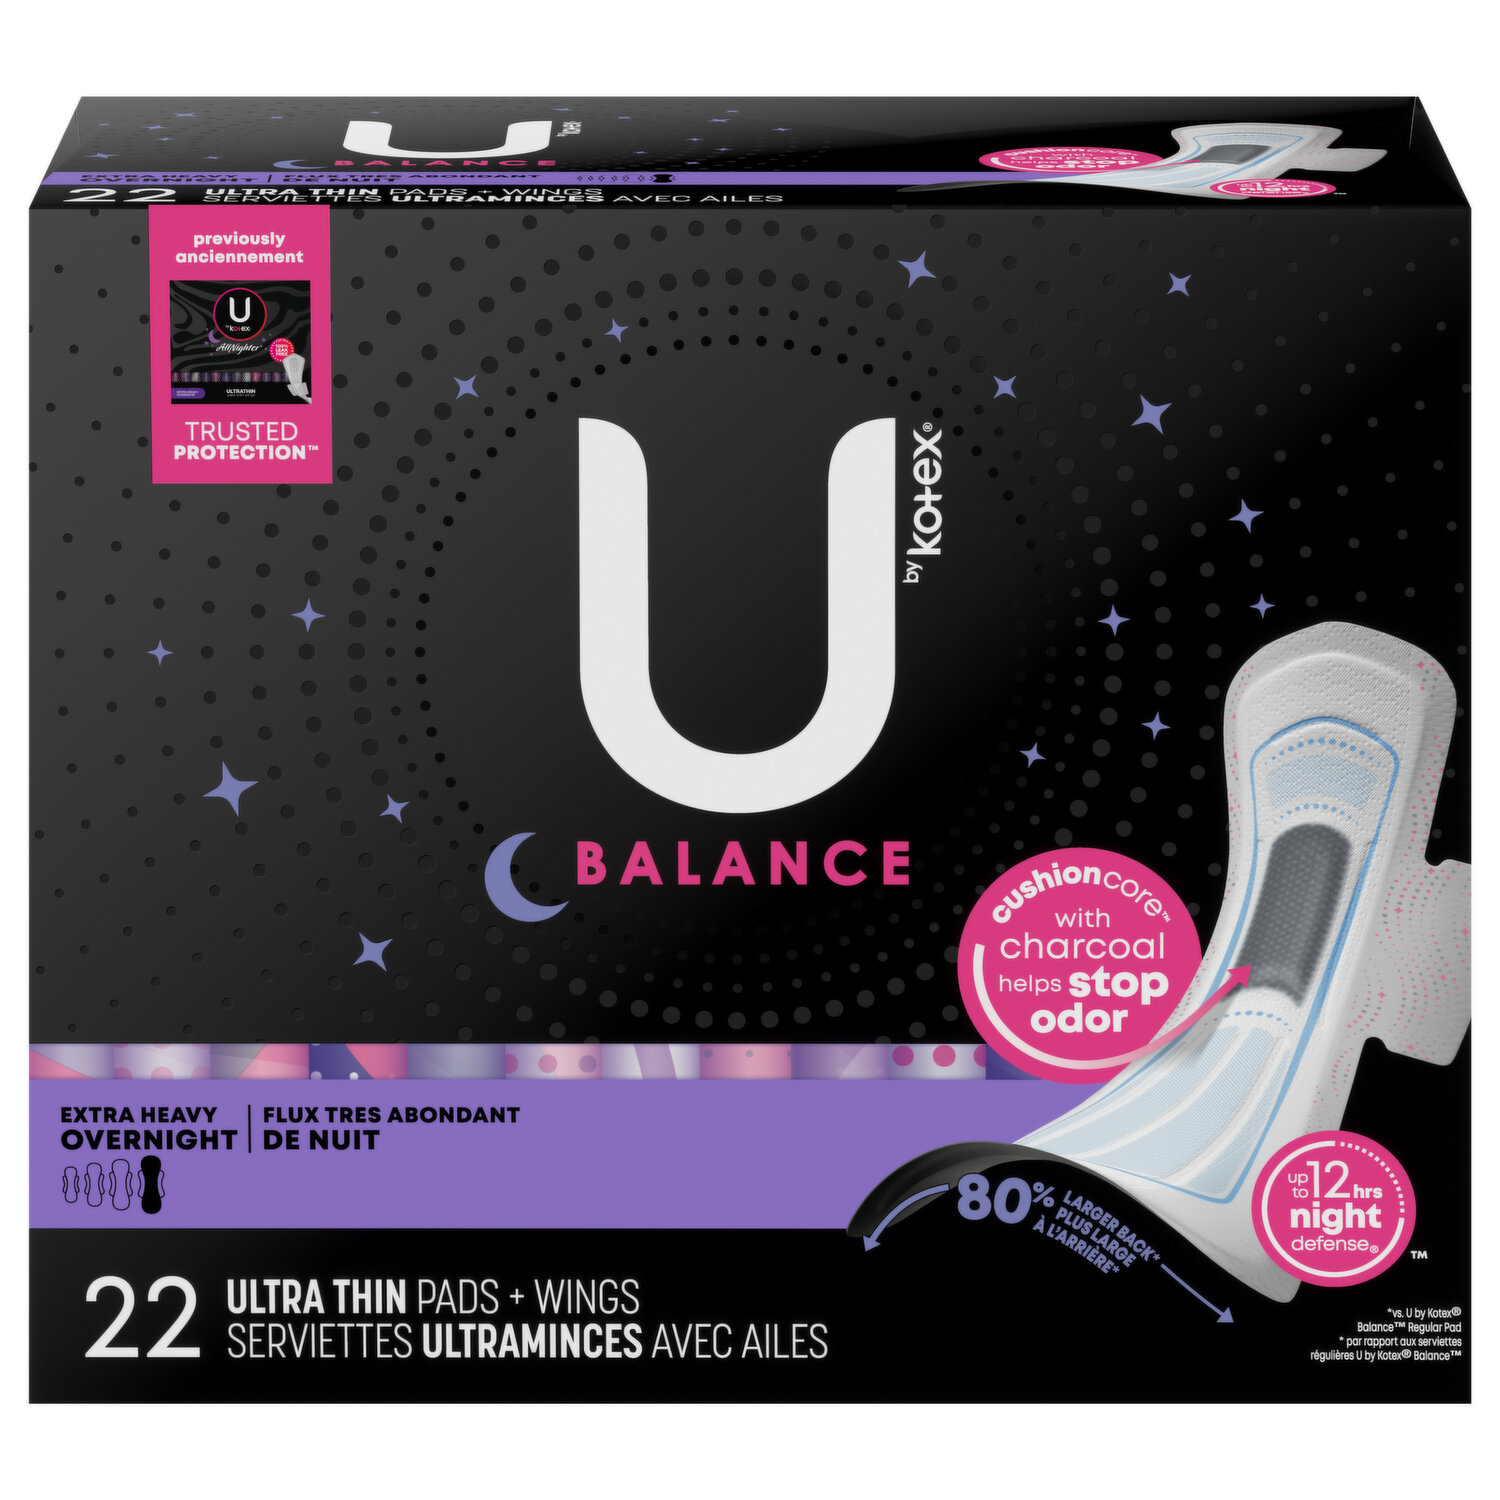 U by Kotex Pads + Wings, Ultra Thin, Extra Heavy Overnight - Super 1 Foods